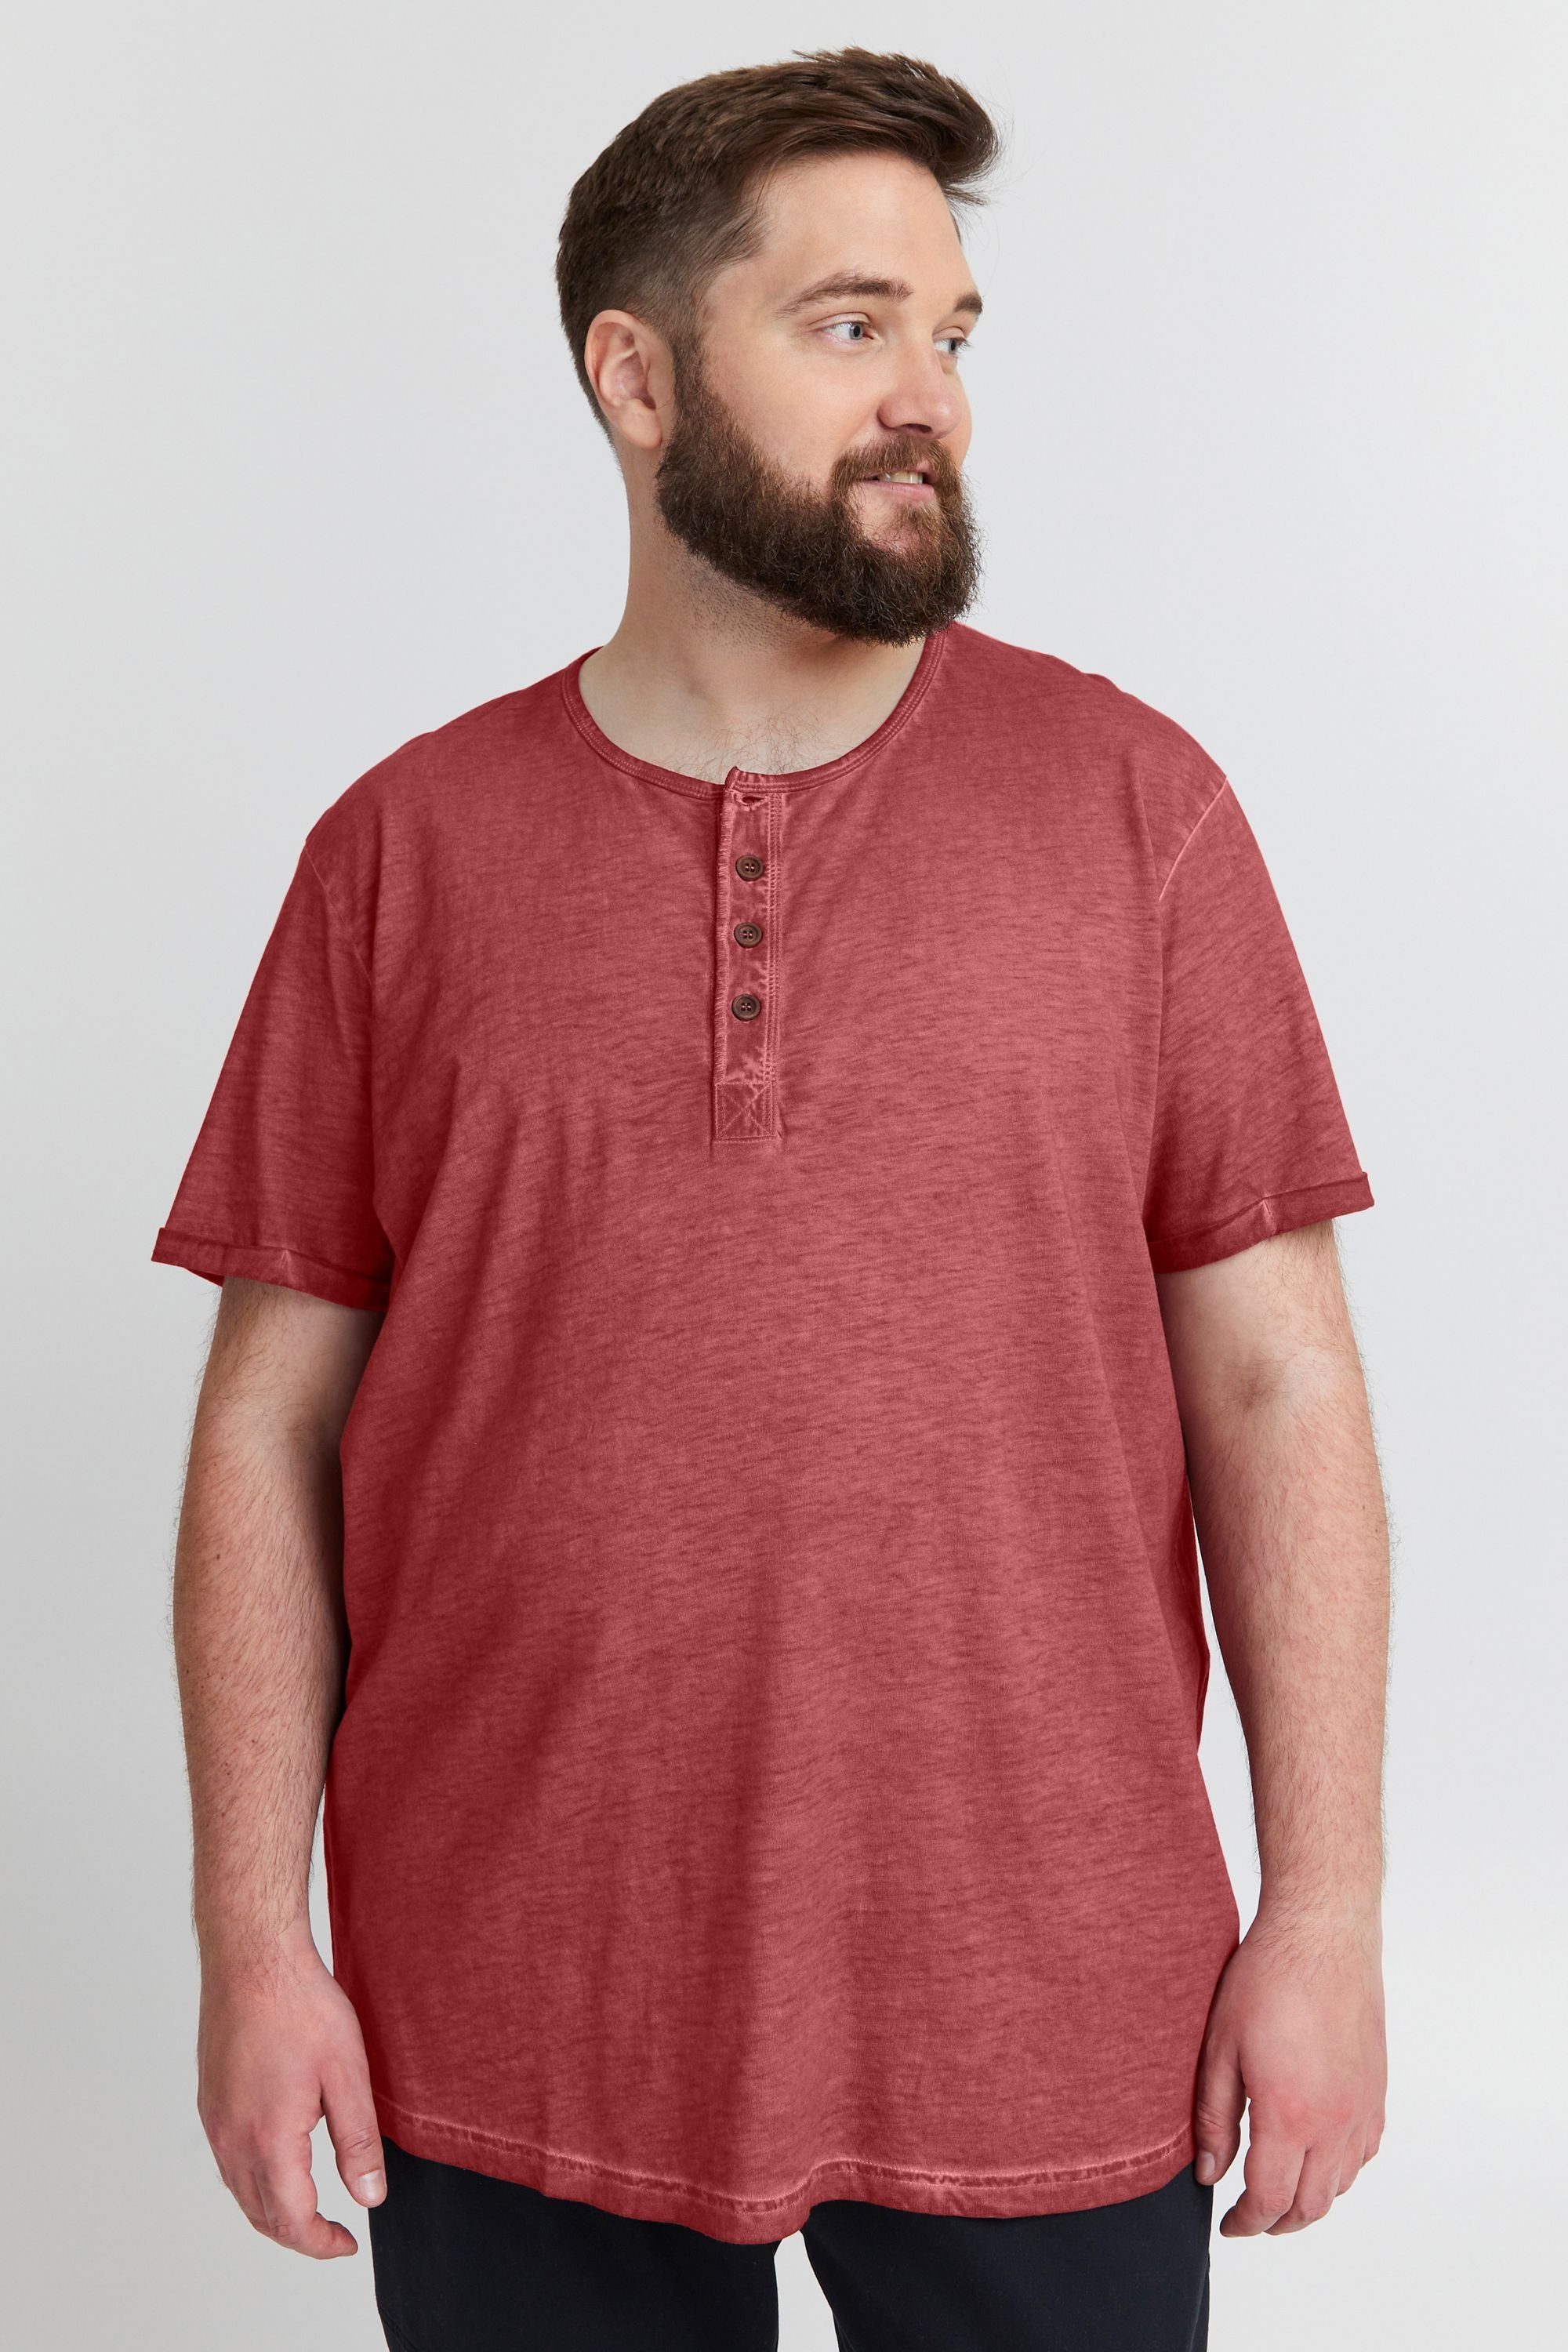 T-Shirt RED BT !Solid (790985) SDTihn WINE